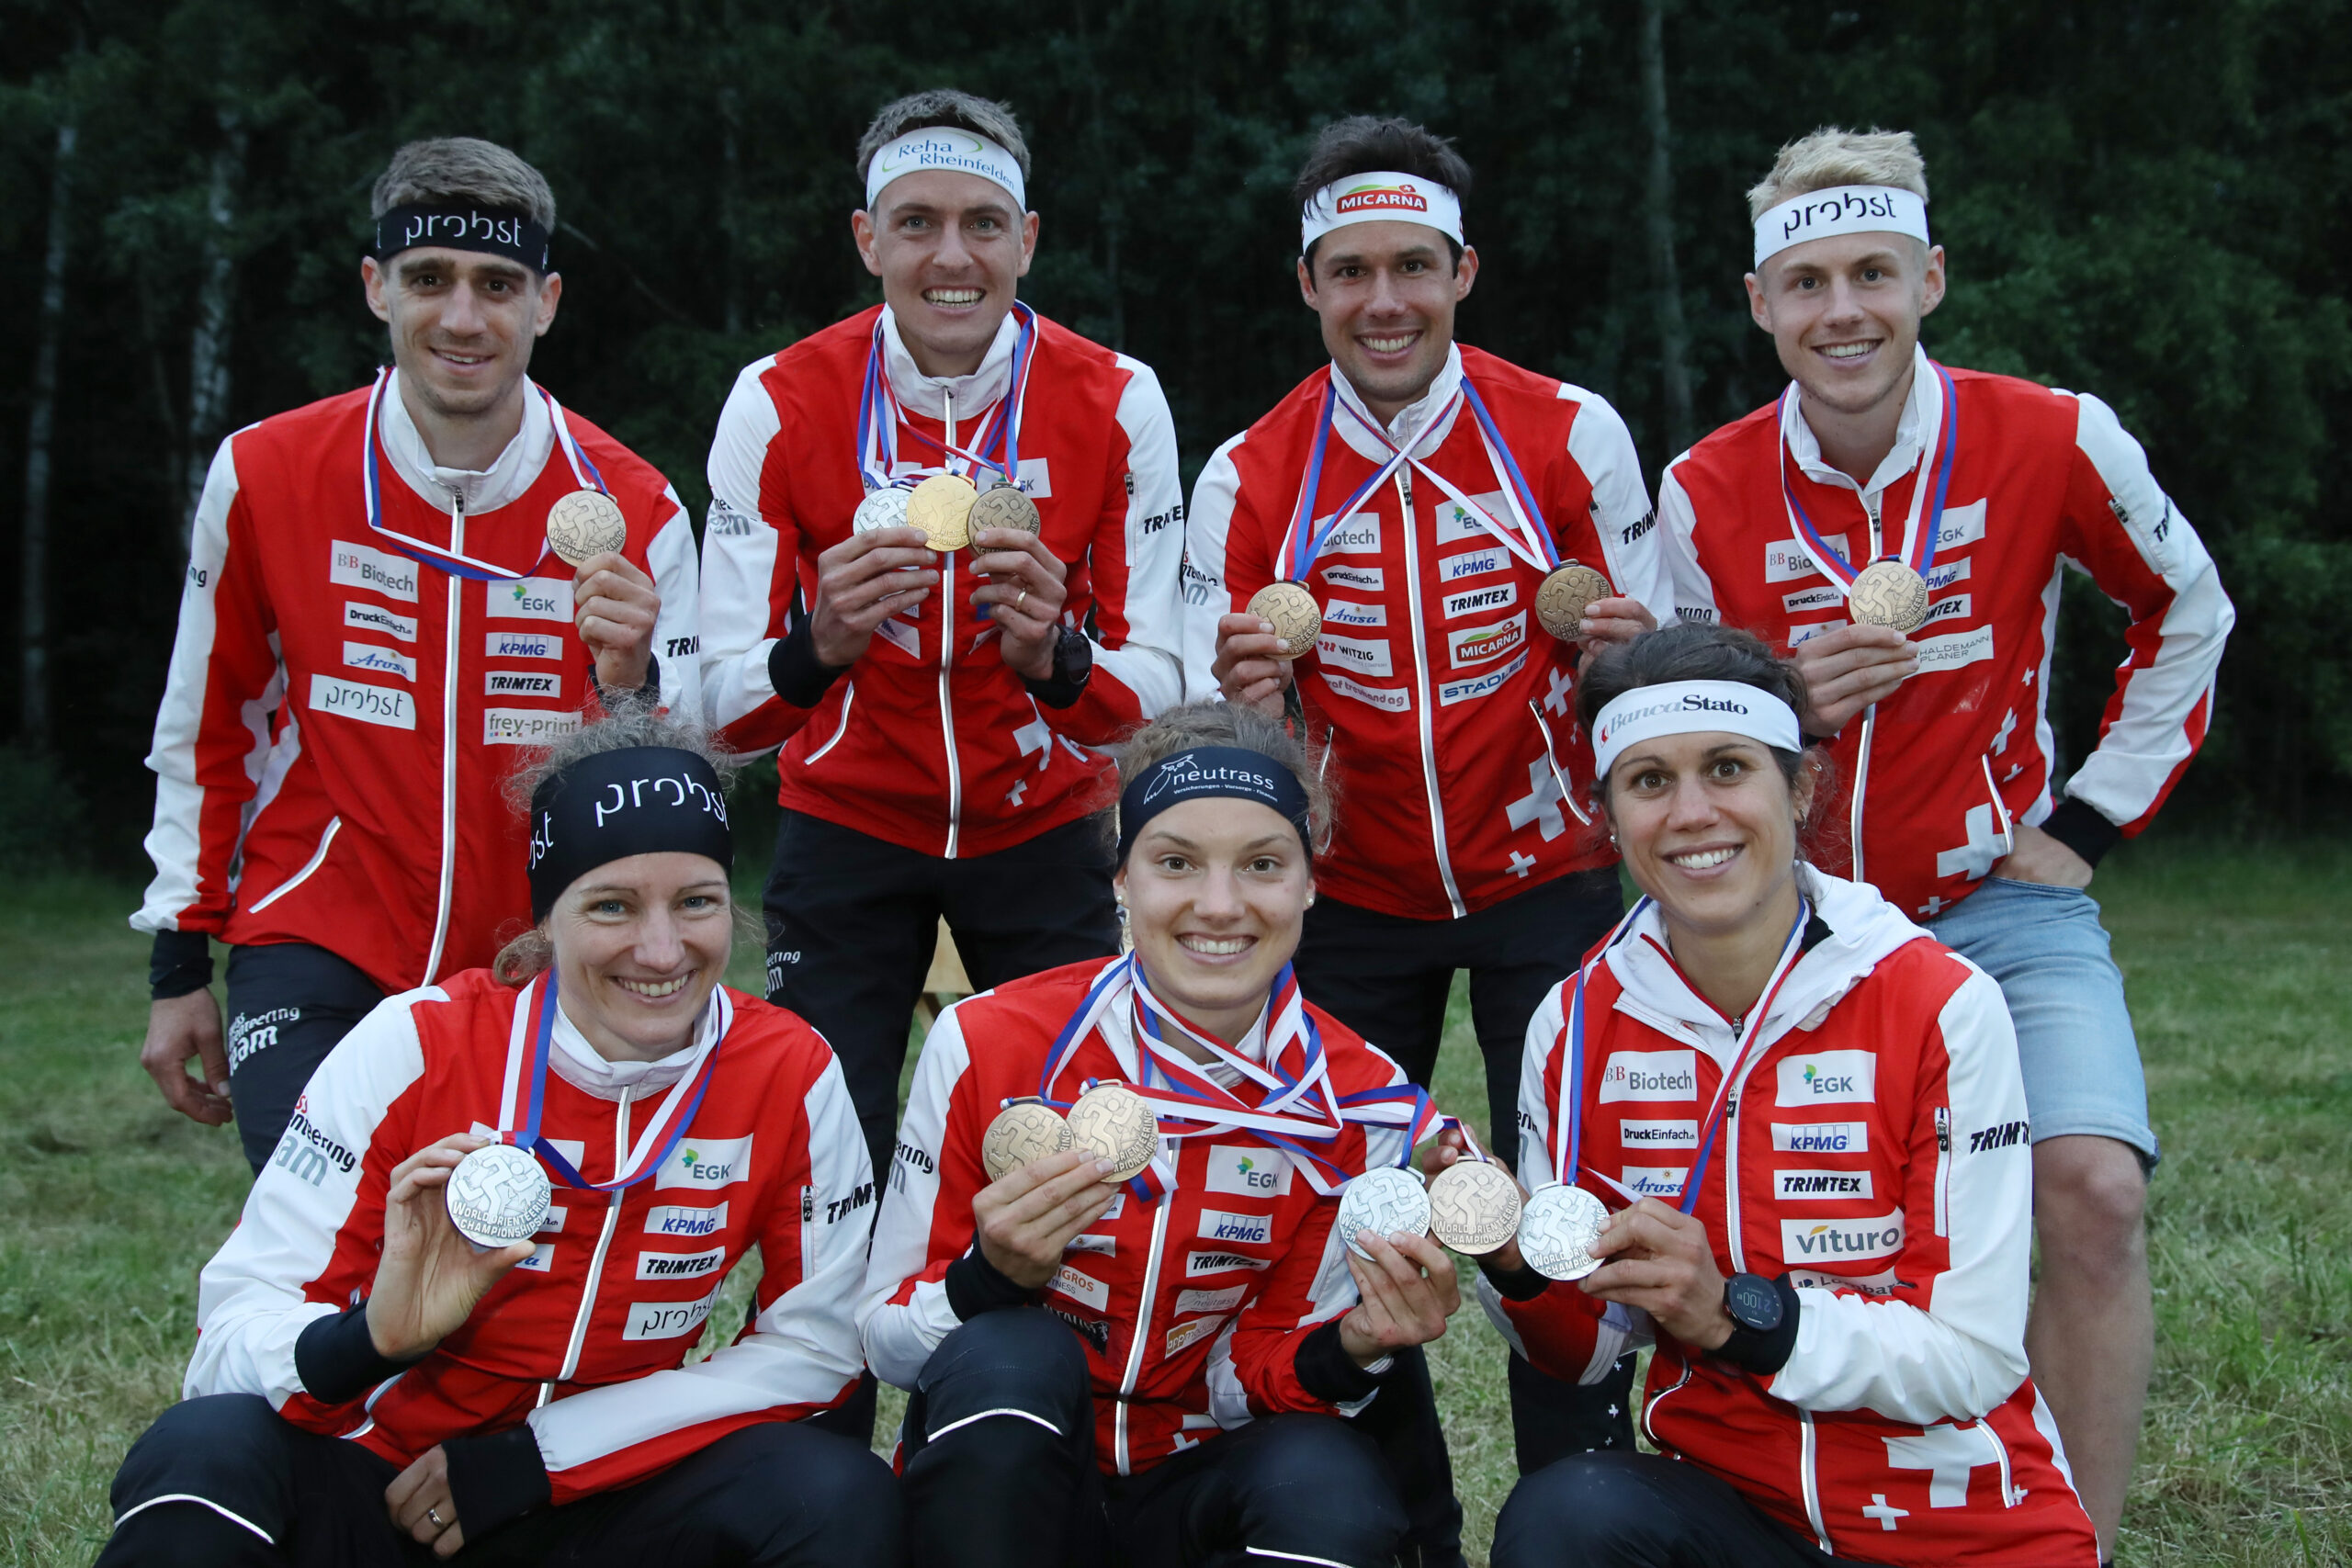 7 medals for the Swiss Orienteers at the World Championships 2021 in Czech Republic: Sabine Hauswirth, Simona Aebersold and Elena Roos (FLTR in front), Florian Howald, Matthias Kyburz, Martin Hubmann and Joey Hadorn (FLTR in the back)